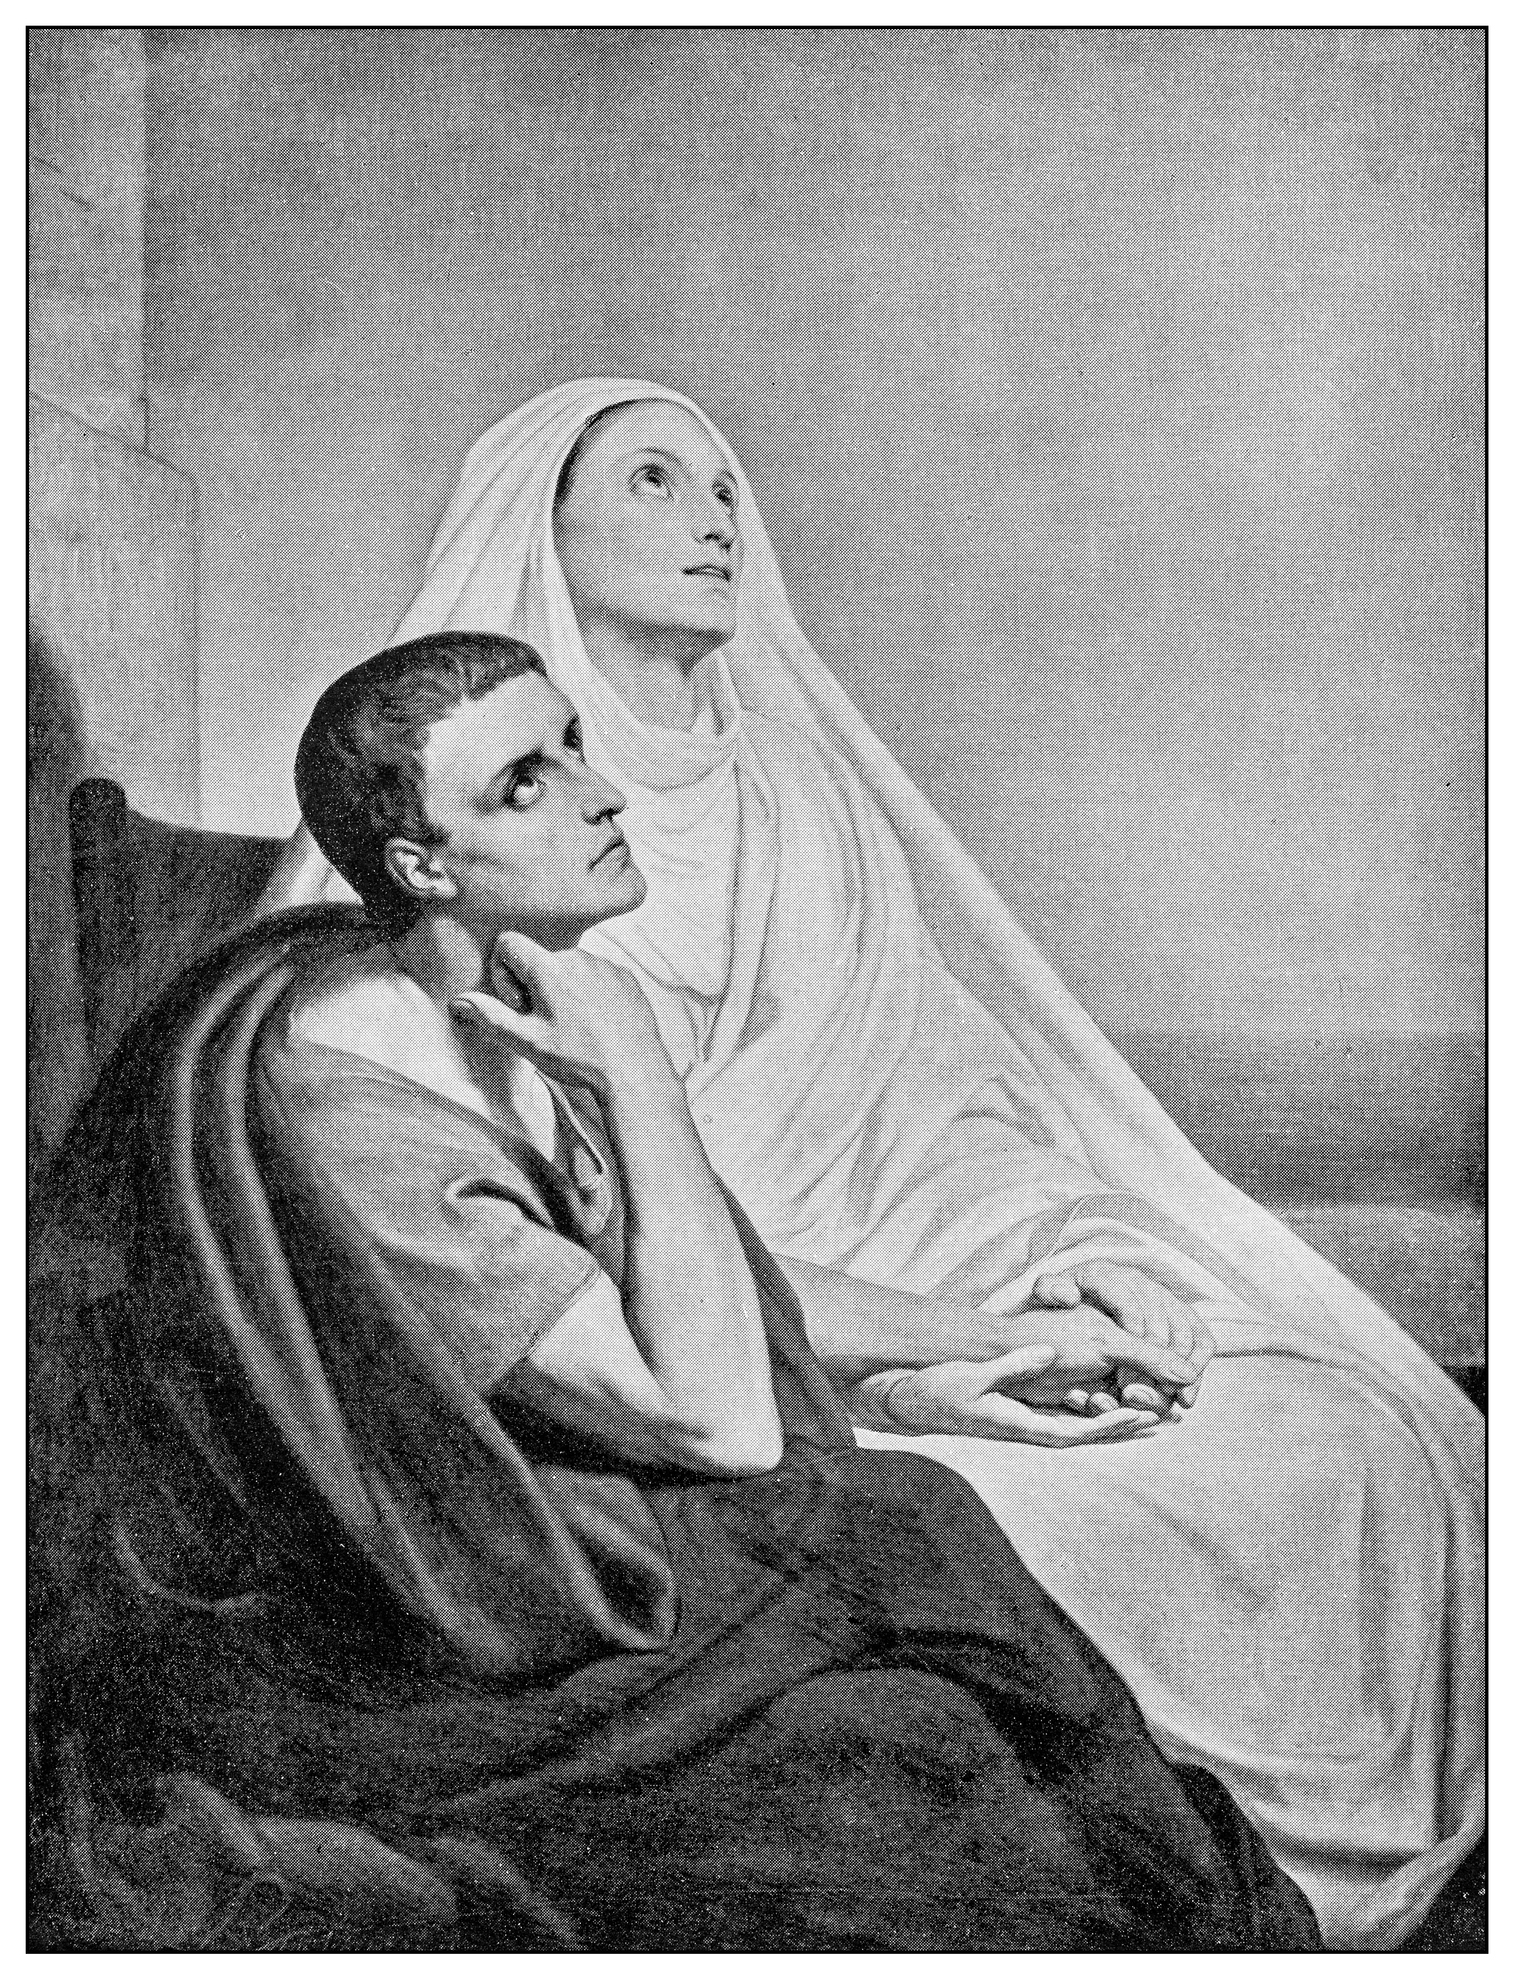 Antique illustration of important people of the past: St Augustine of Hippo and his mother, St Monica